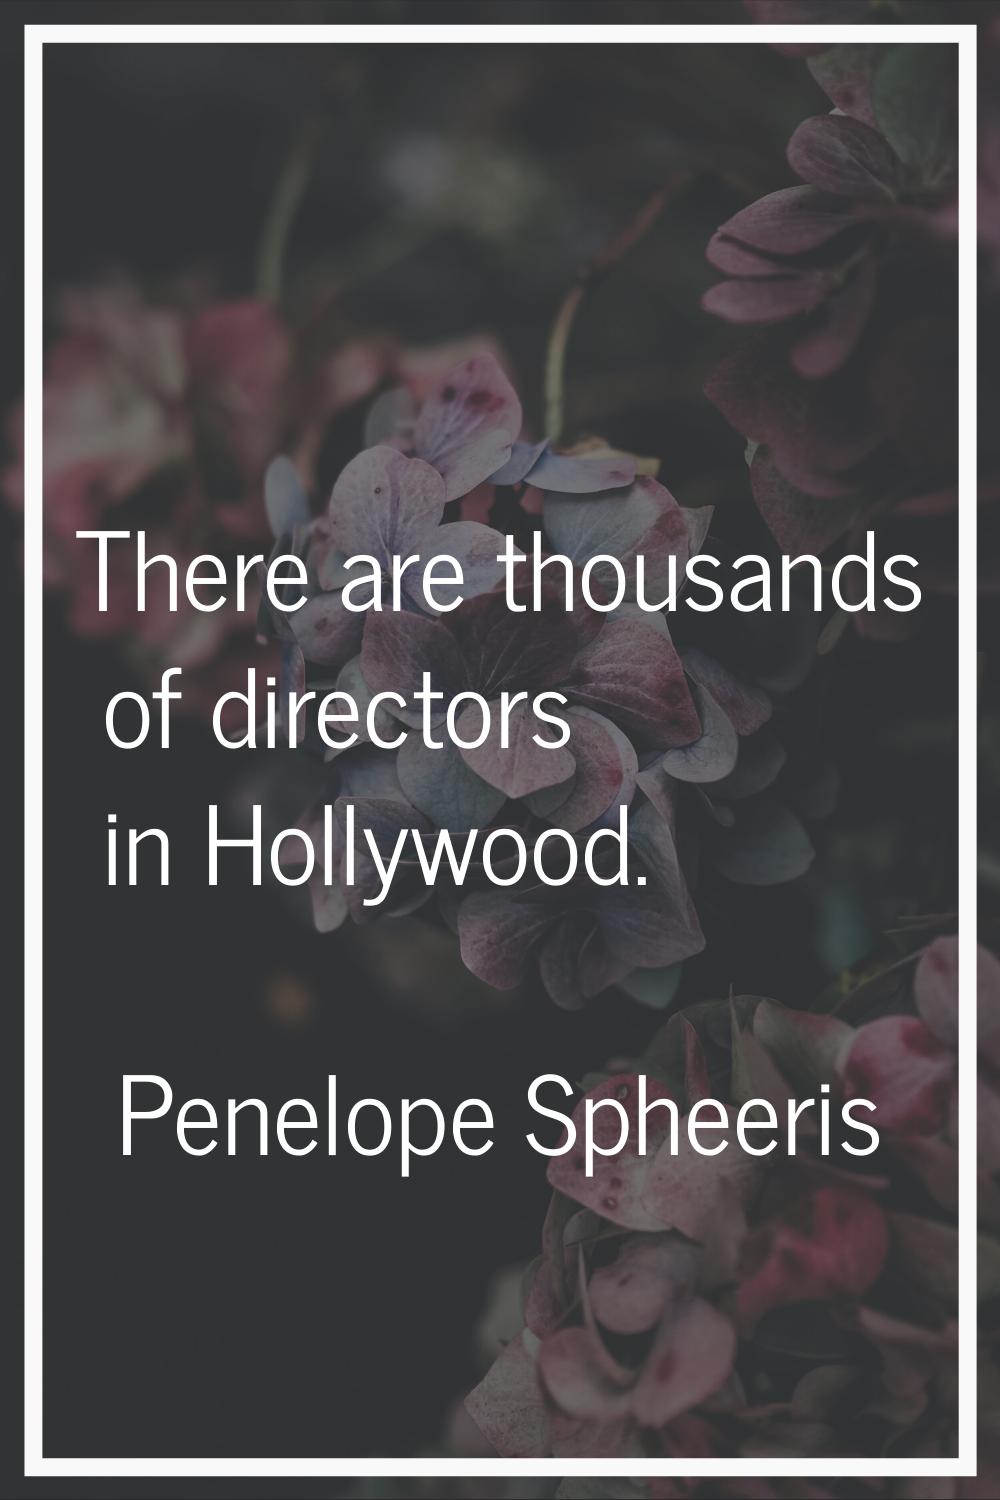 There are thousands of directors in Hollywood.